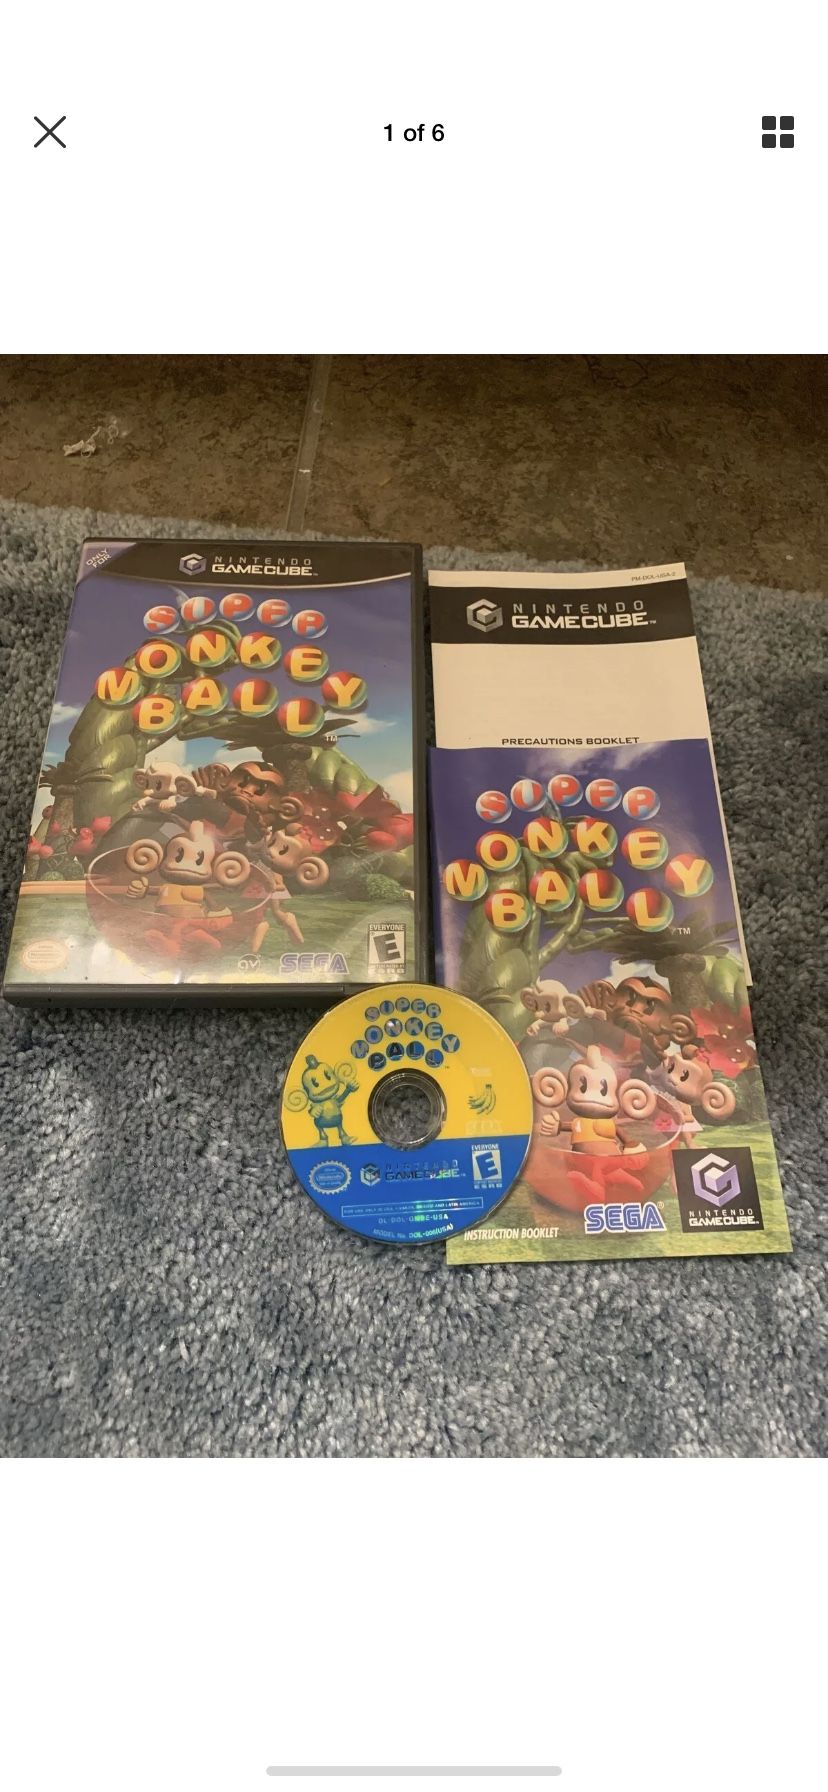 SUPER MONKEY BALL. Nintendo GameCube, 2002) Black Label, Complete And Tested